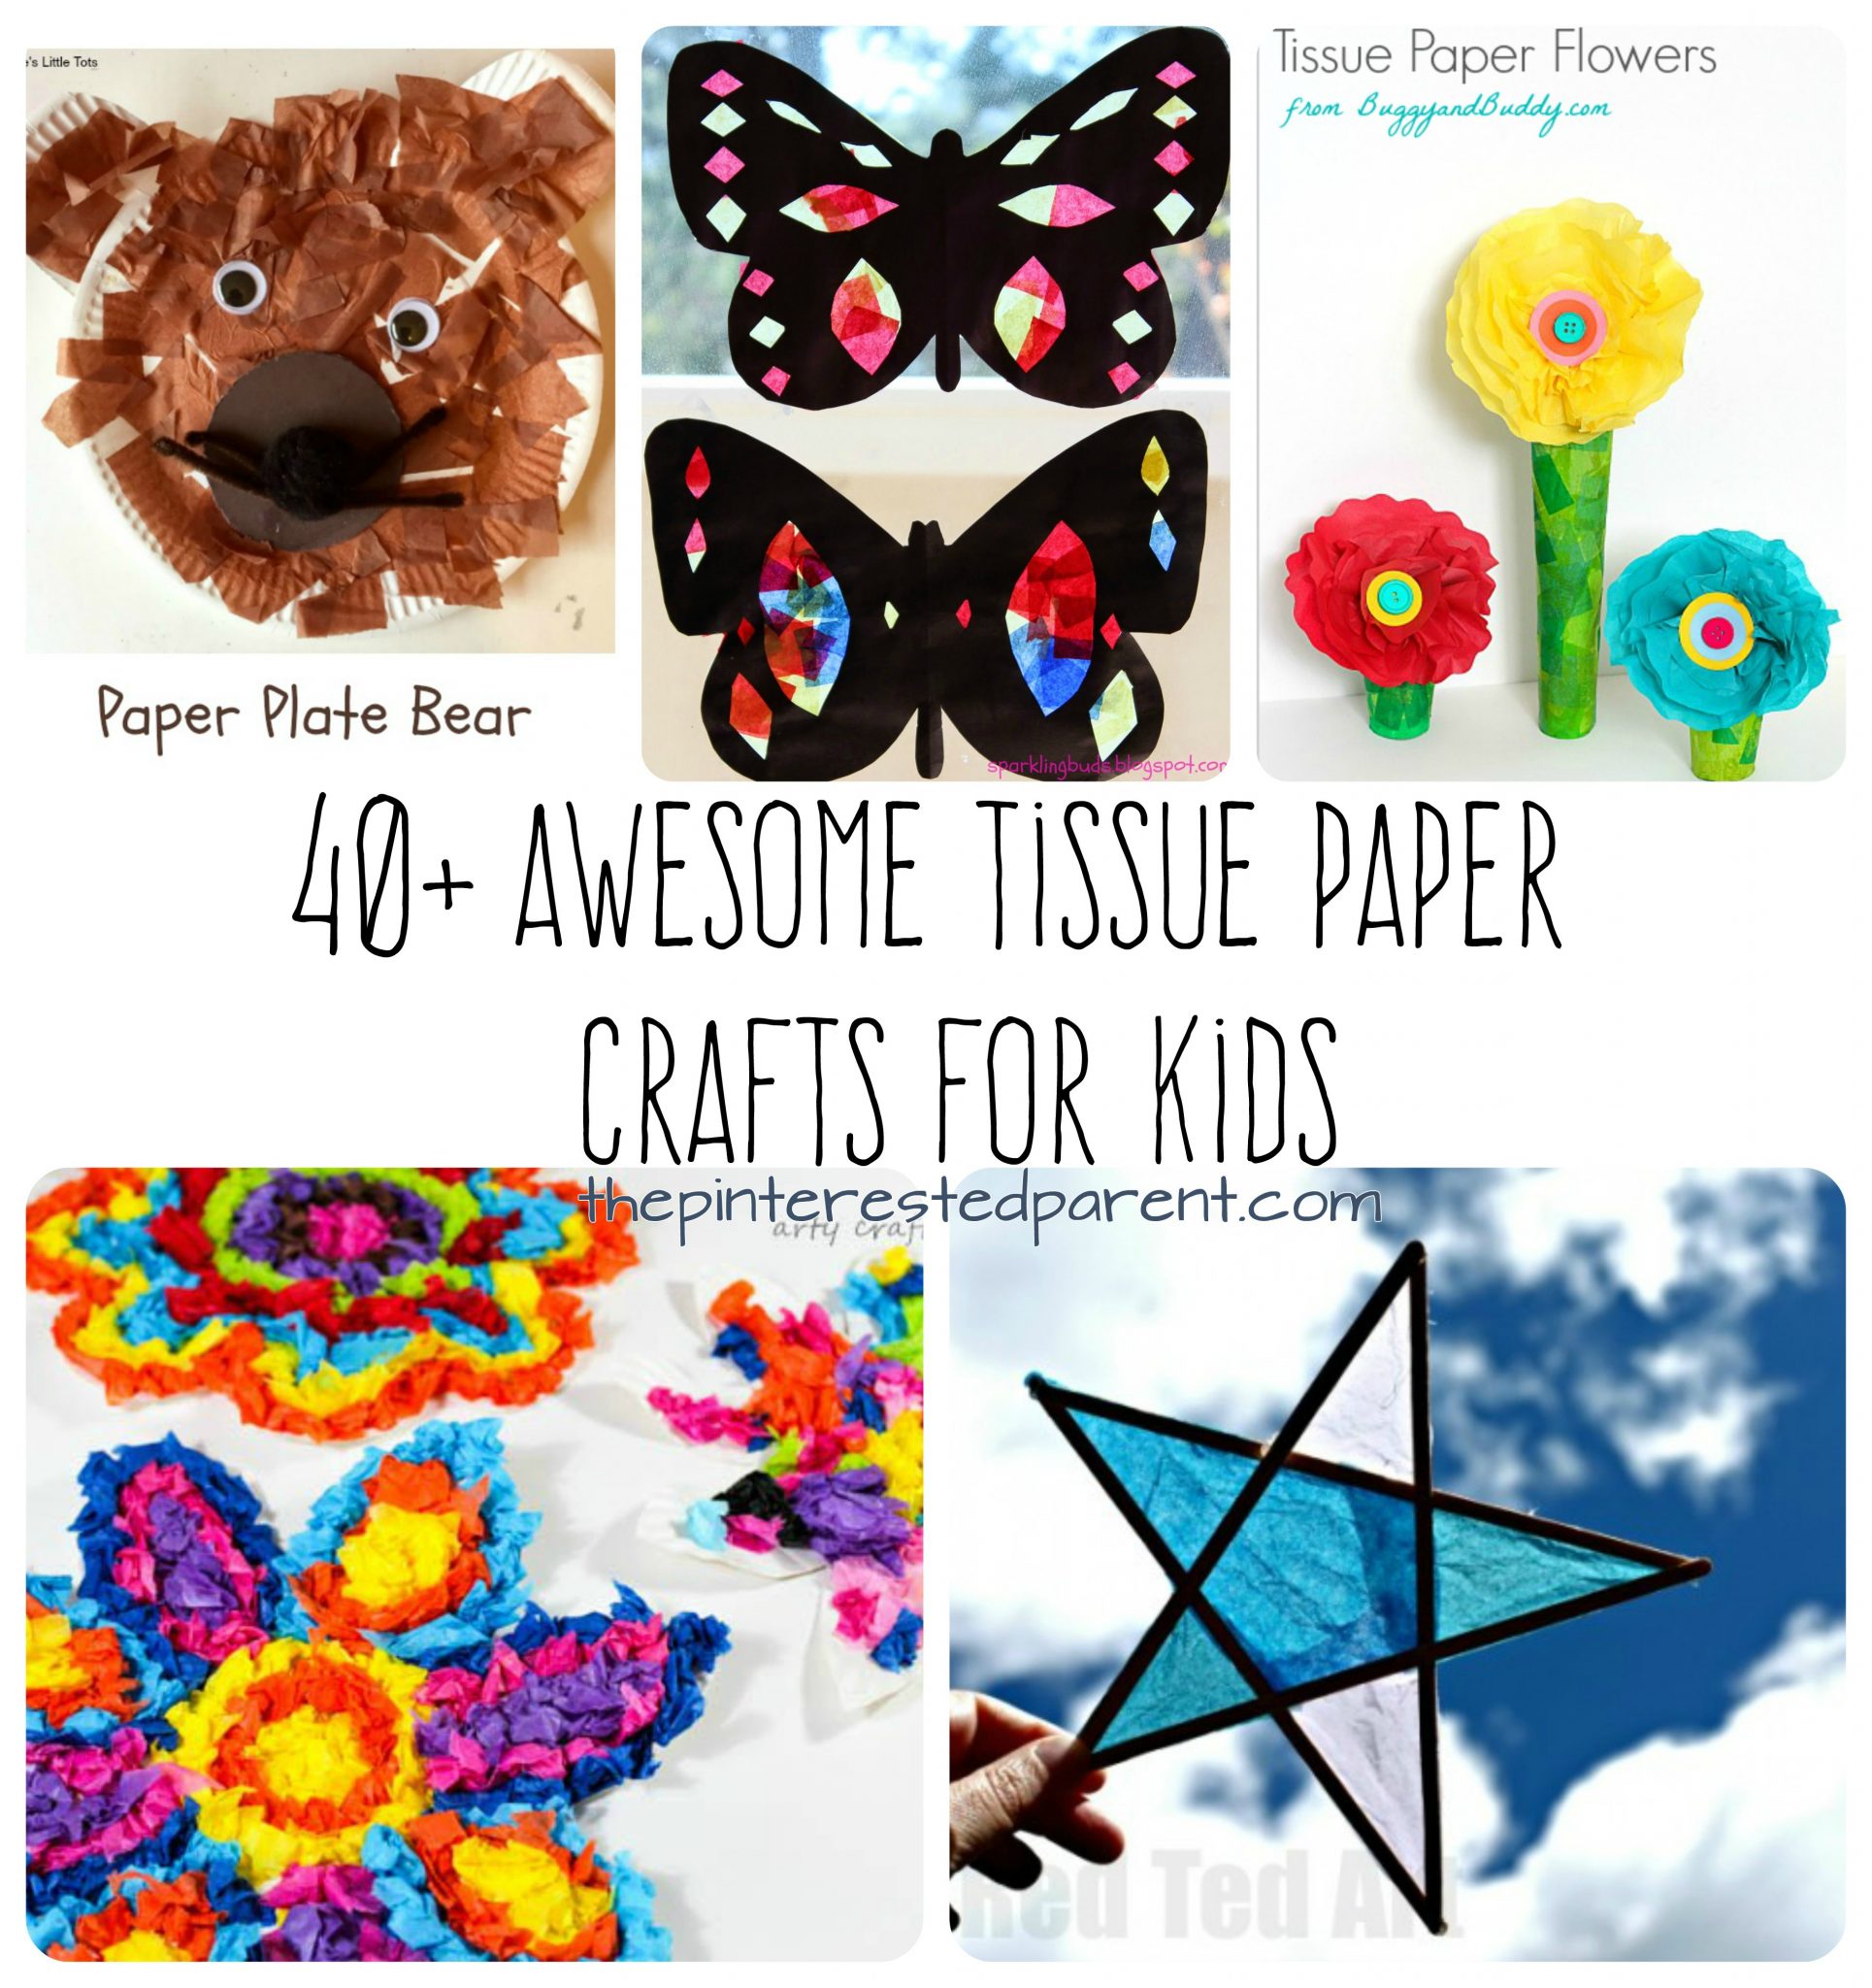 Over 40 Awesome Tissue paper arts and crafts projects for kids. Flowers, animals, seasonal and holidays.